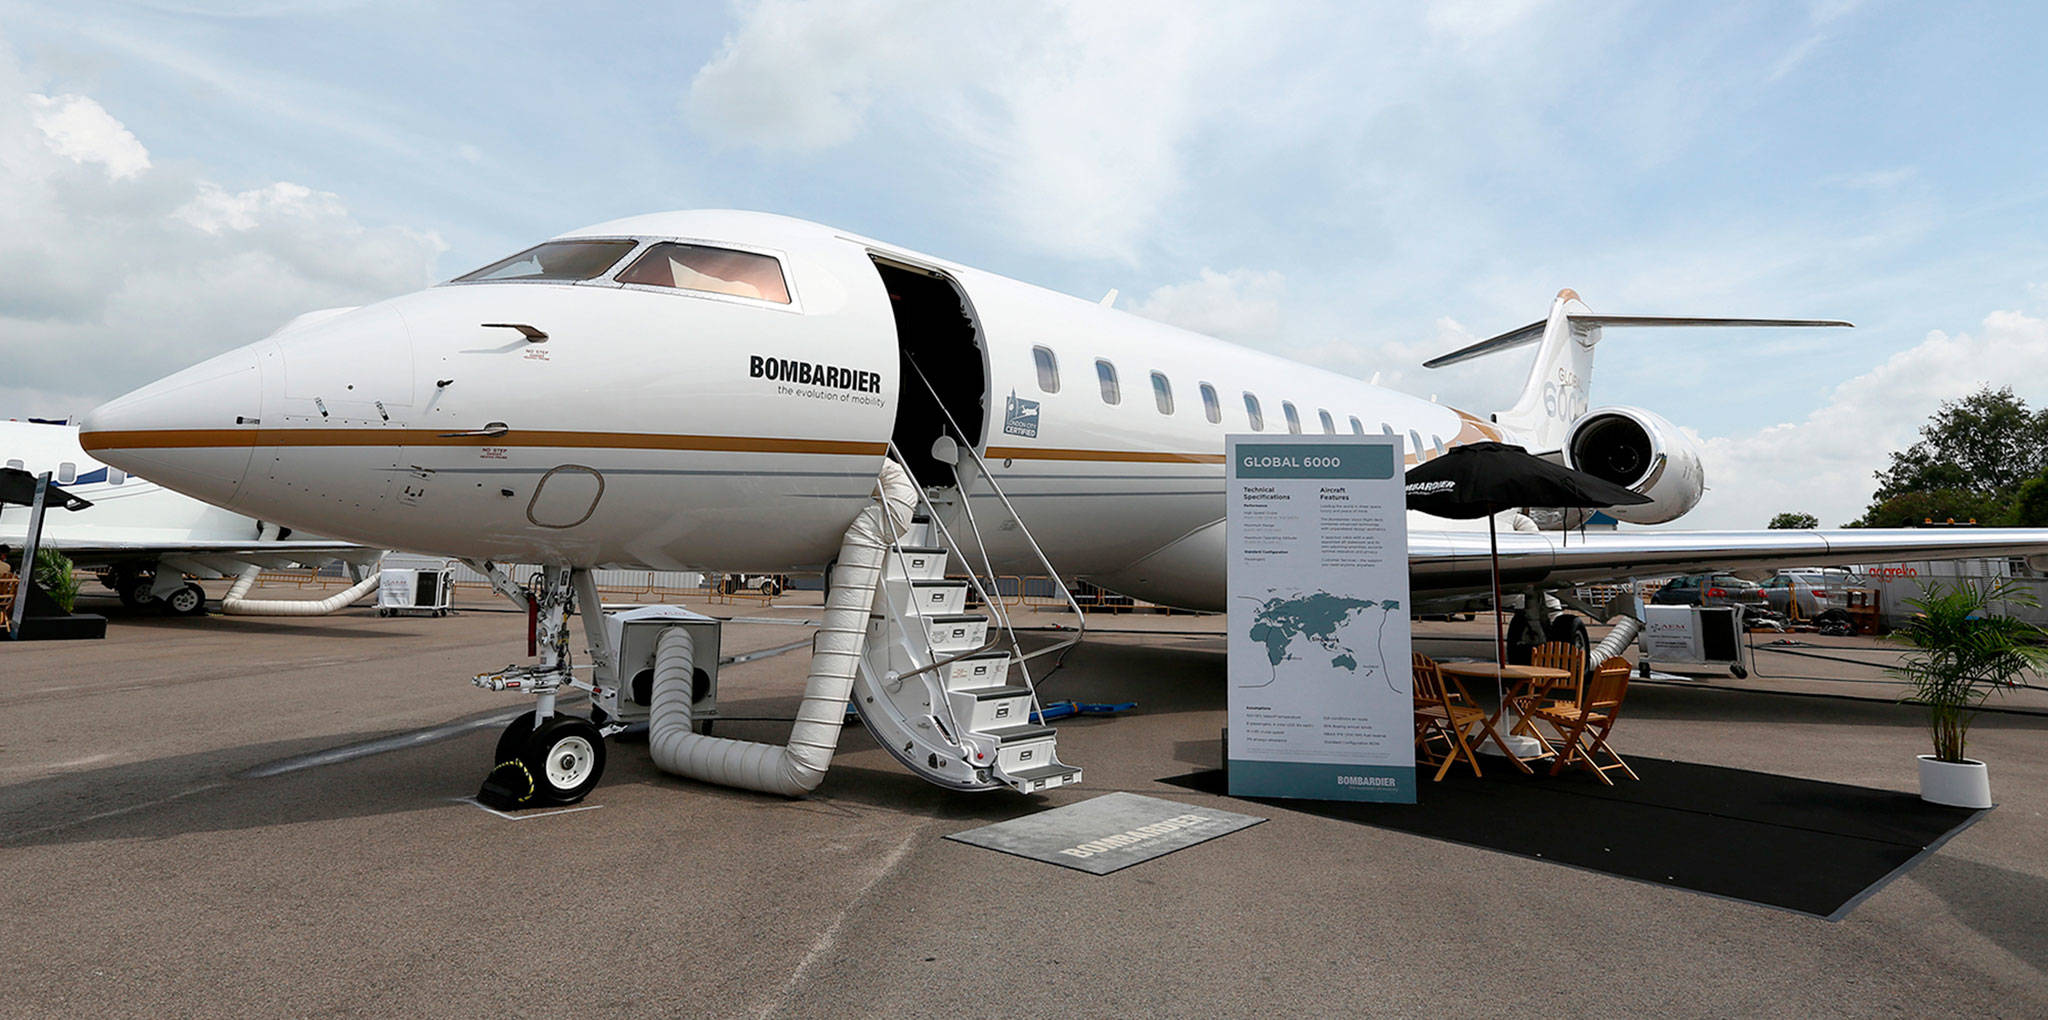 A Bombardier Global 6000 business jet on display at the Singapore Airshow in Singapore in 2016. (SeongJoon Cho / Bloomberg News)